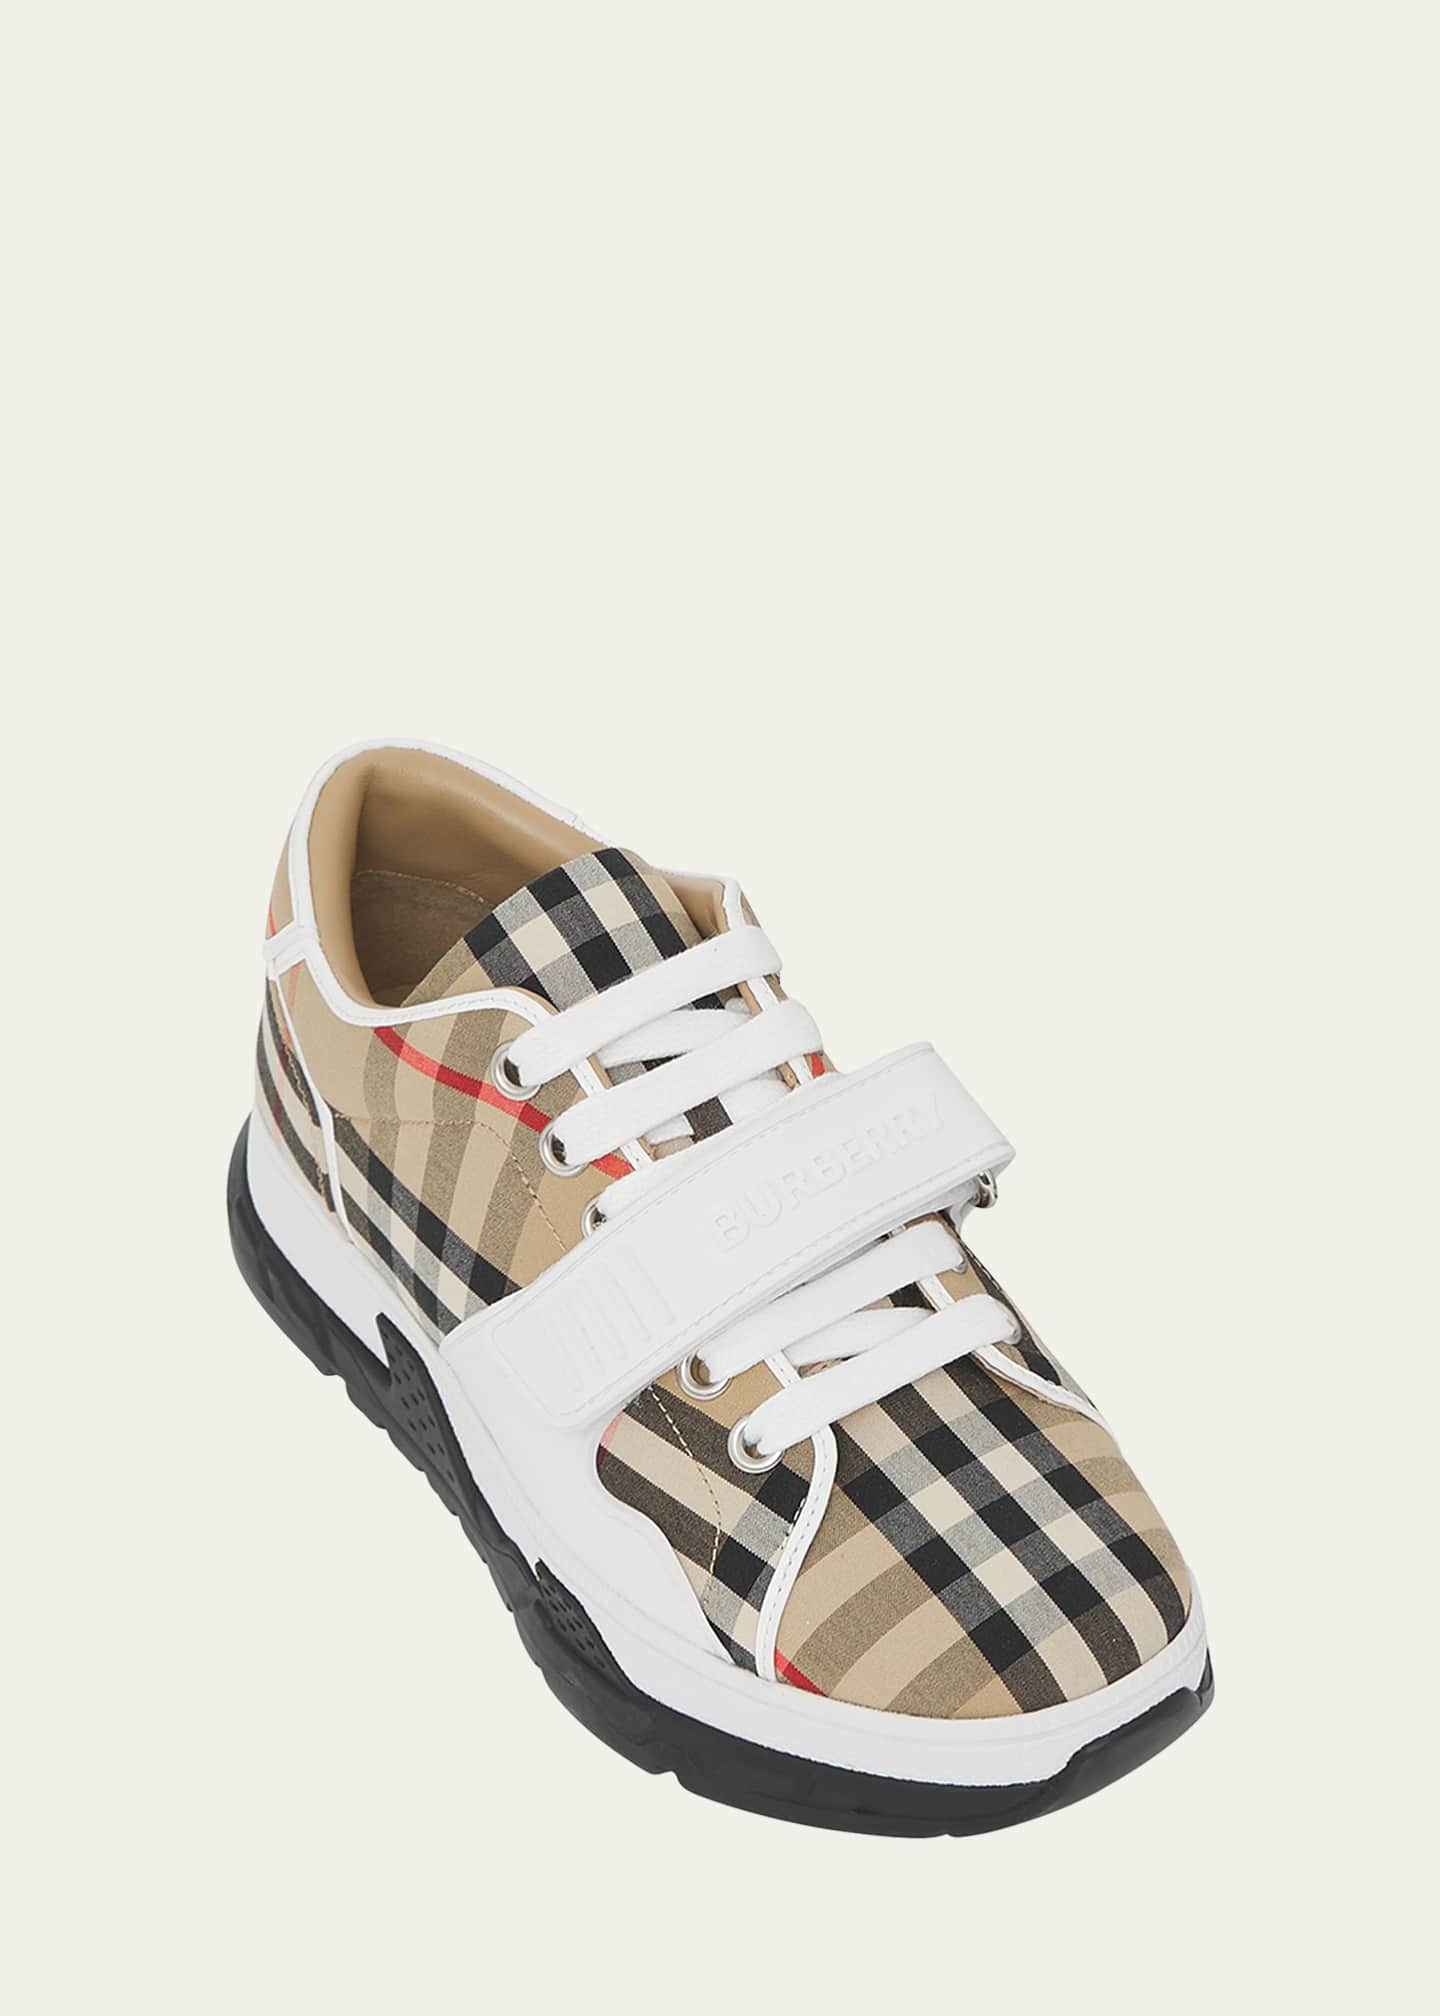 Burberry Kid's Union Strap Vintage Check Low Top Trainer, Size Toddler/Kids  - Bergdorf Goodman